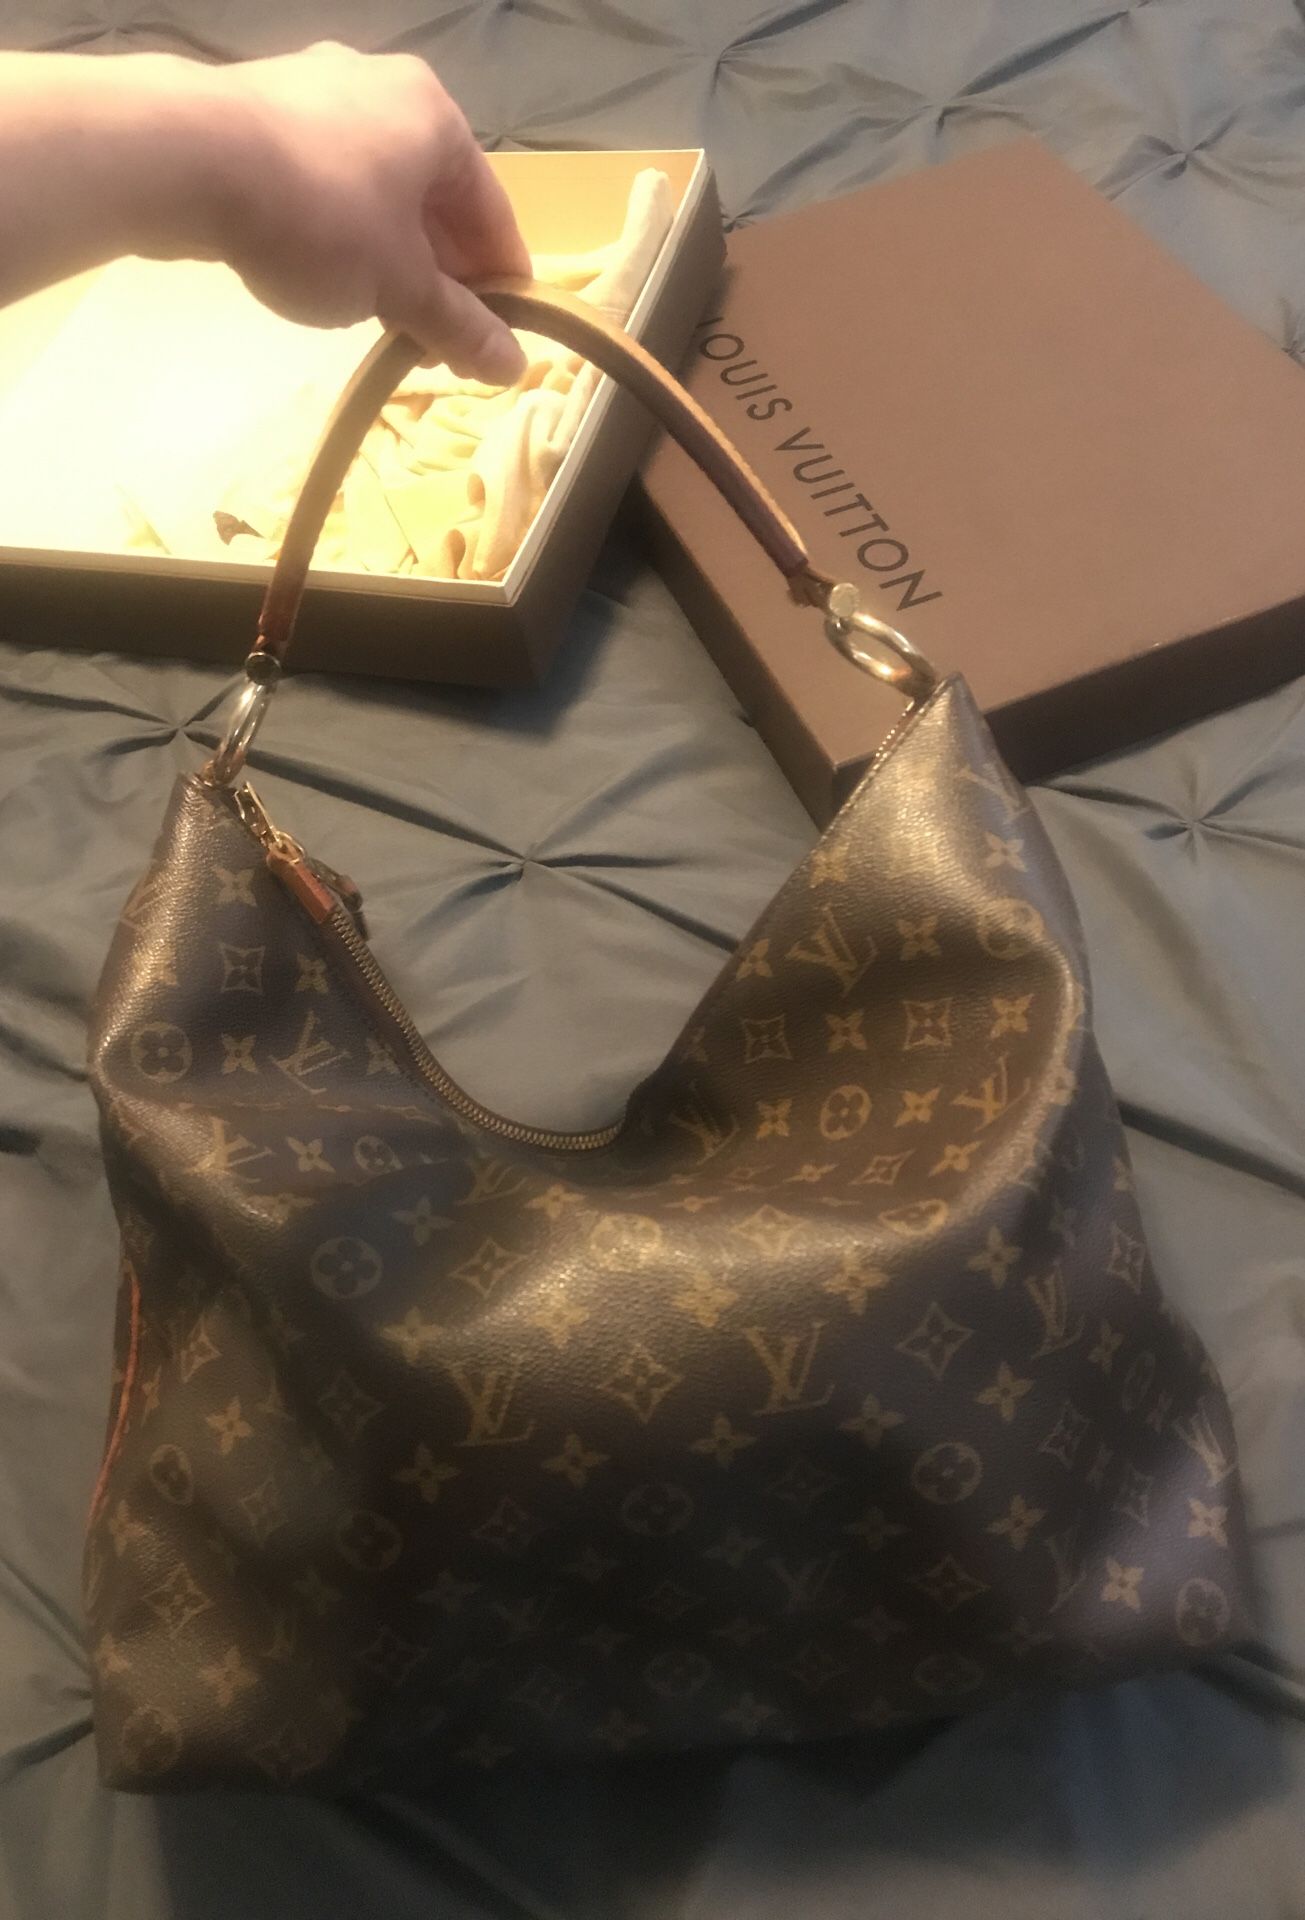 Lv Favorite MM for Sale in Torrance, CA - OfferUp